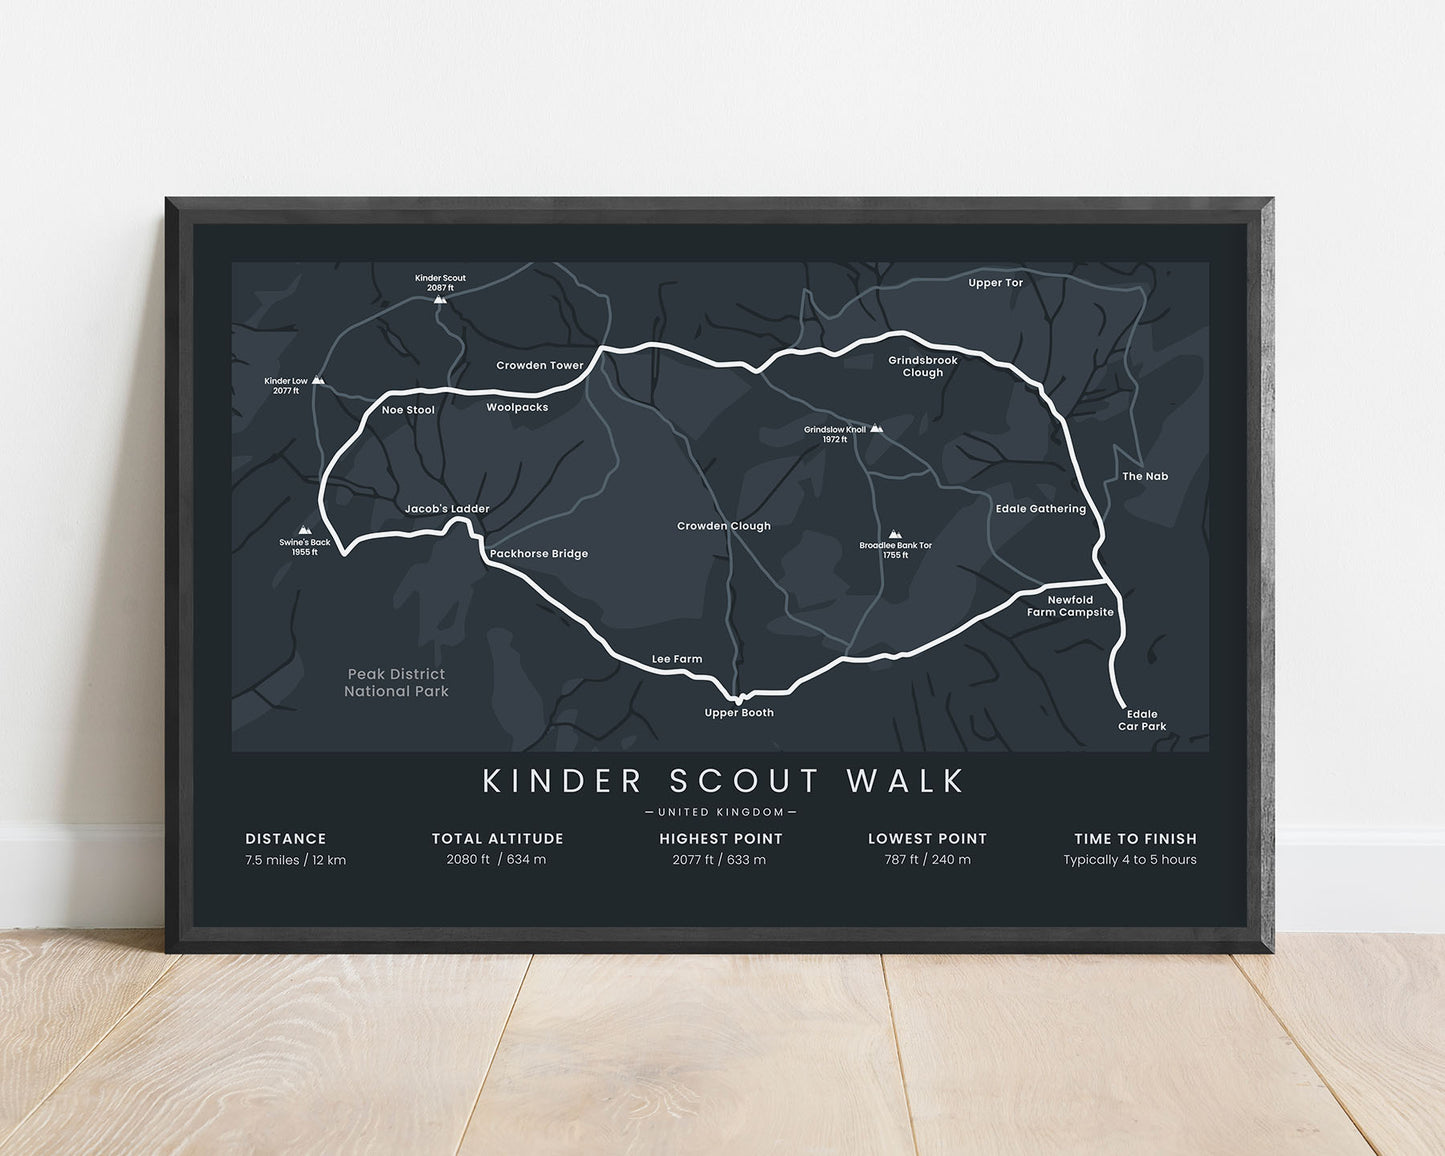 Kinder Scout Walk (England) trek wall map with black background